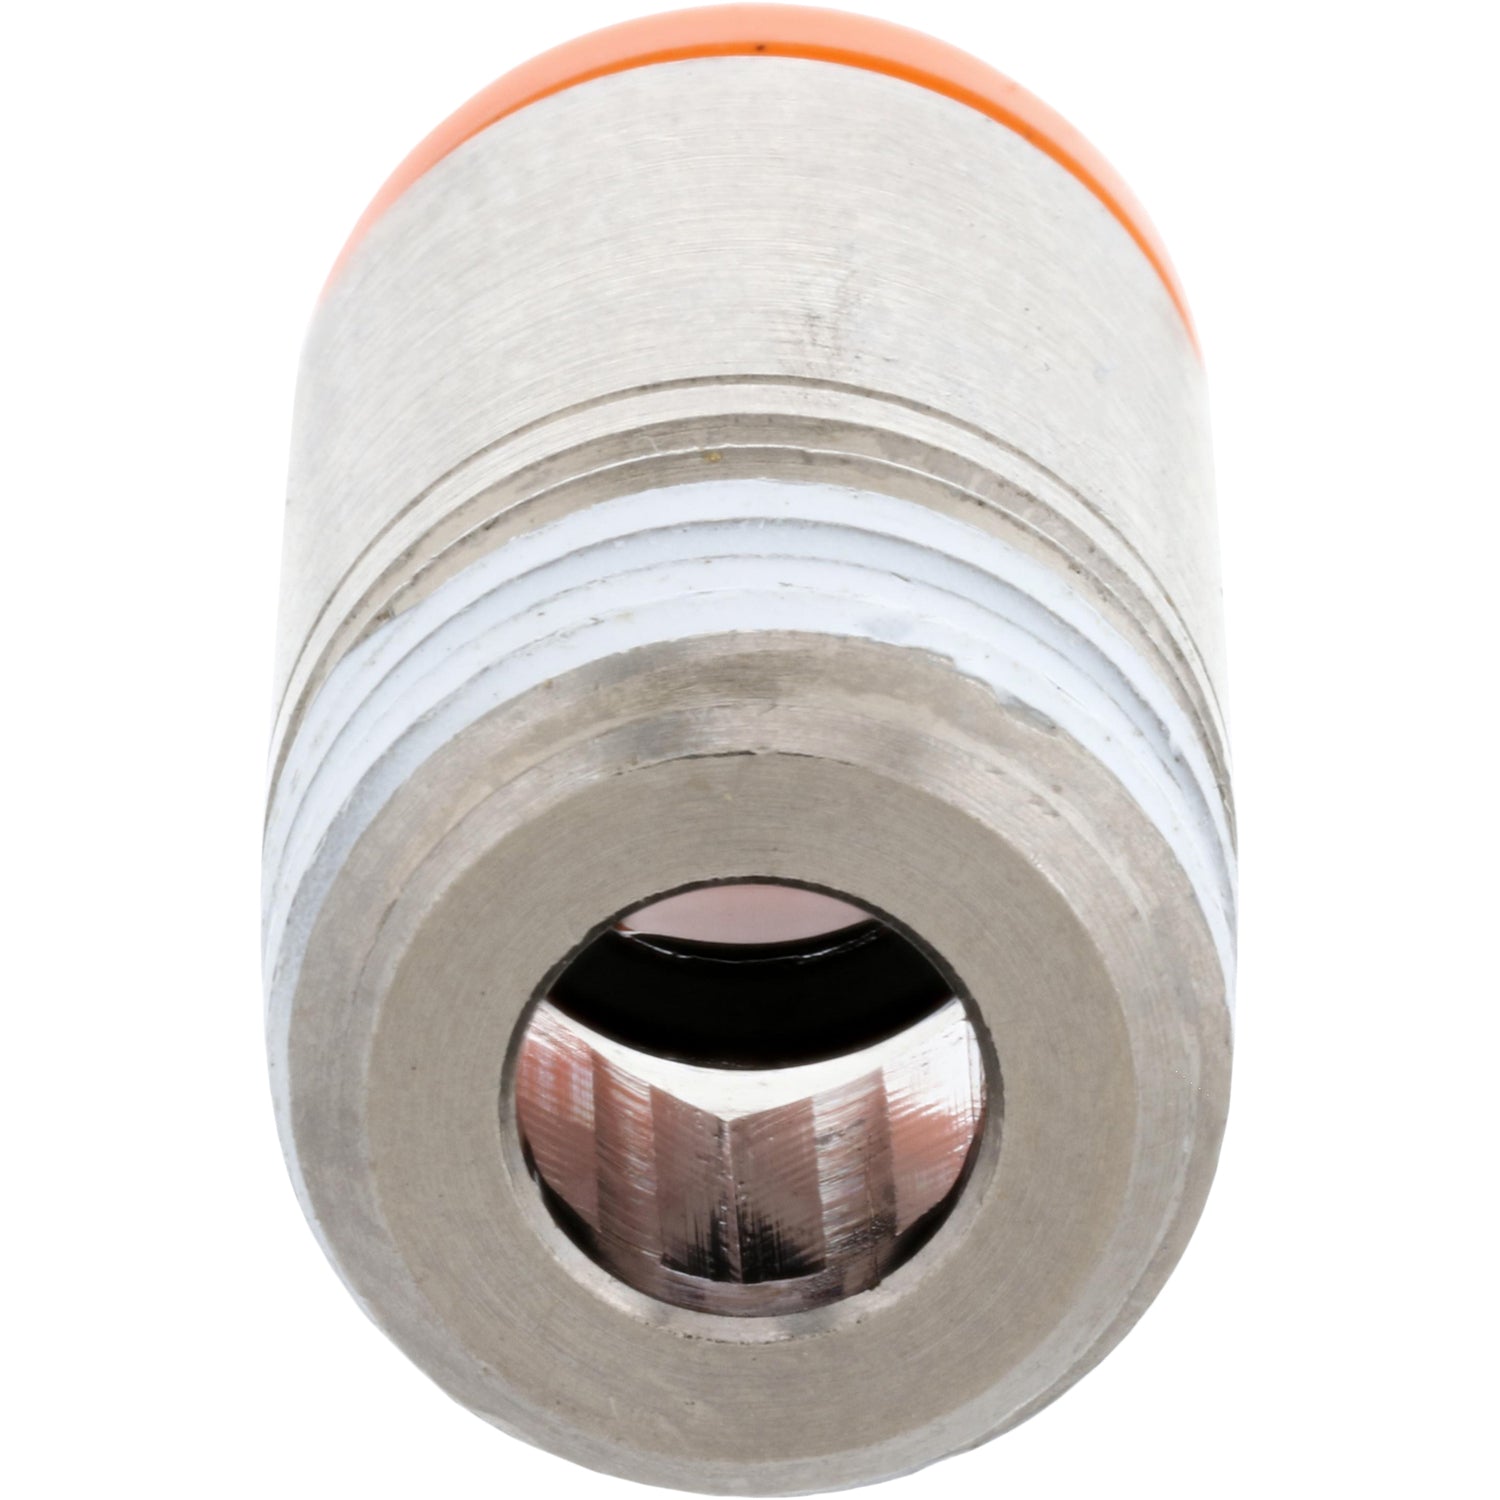 stainless steel and orange plastic push connect fitting on white background. 